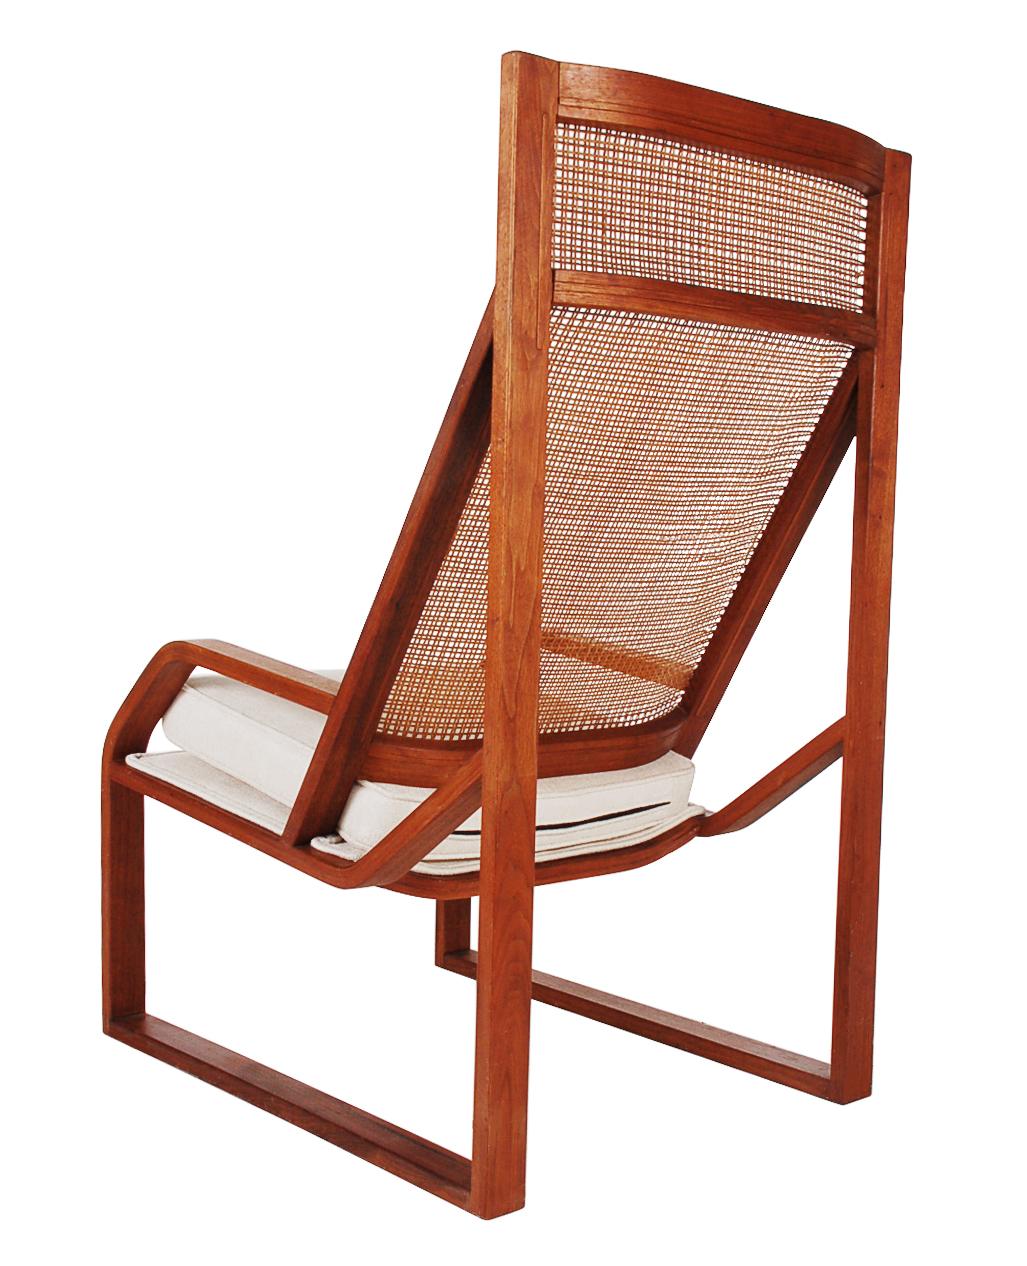 A very neat larger scale high-back lounge chair from Scandinavia circa 1960s it features a high back solid teak frame, cane backrest, and upholstered seating area.